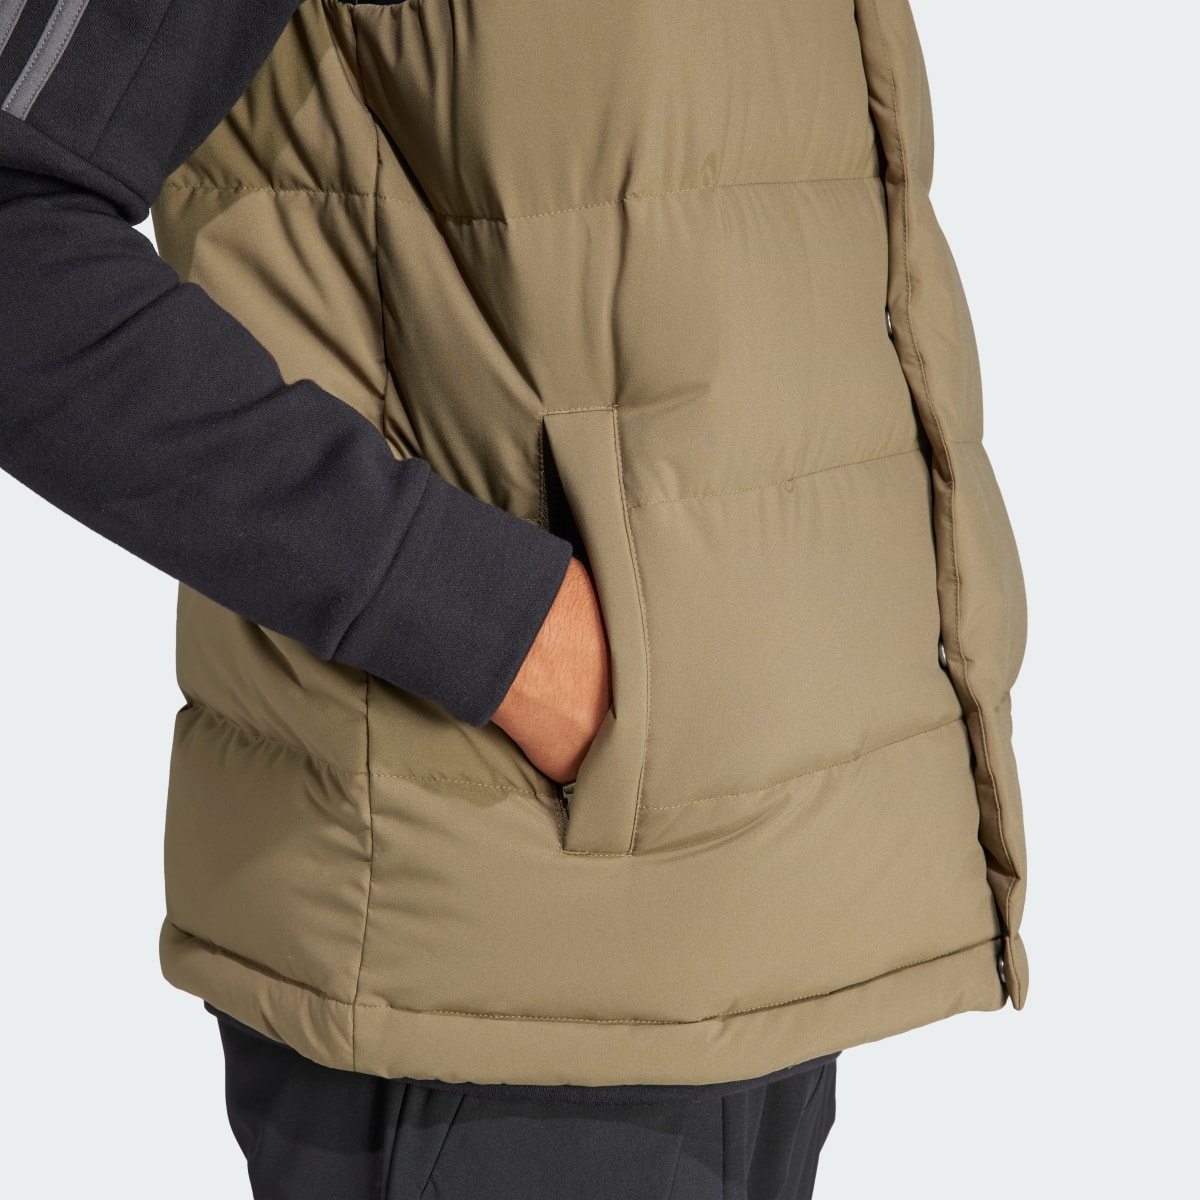 Adidas Helionic Hooded Down Vest. 6